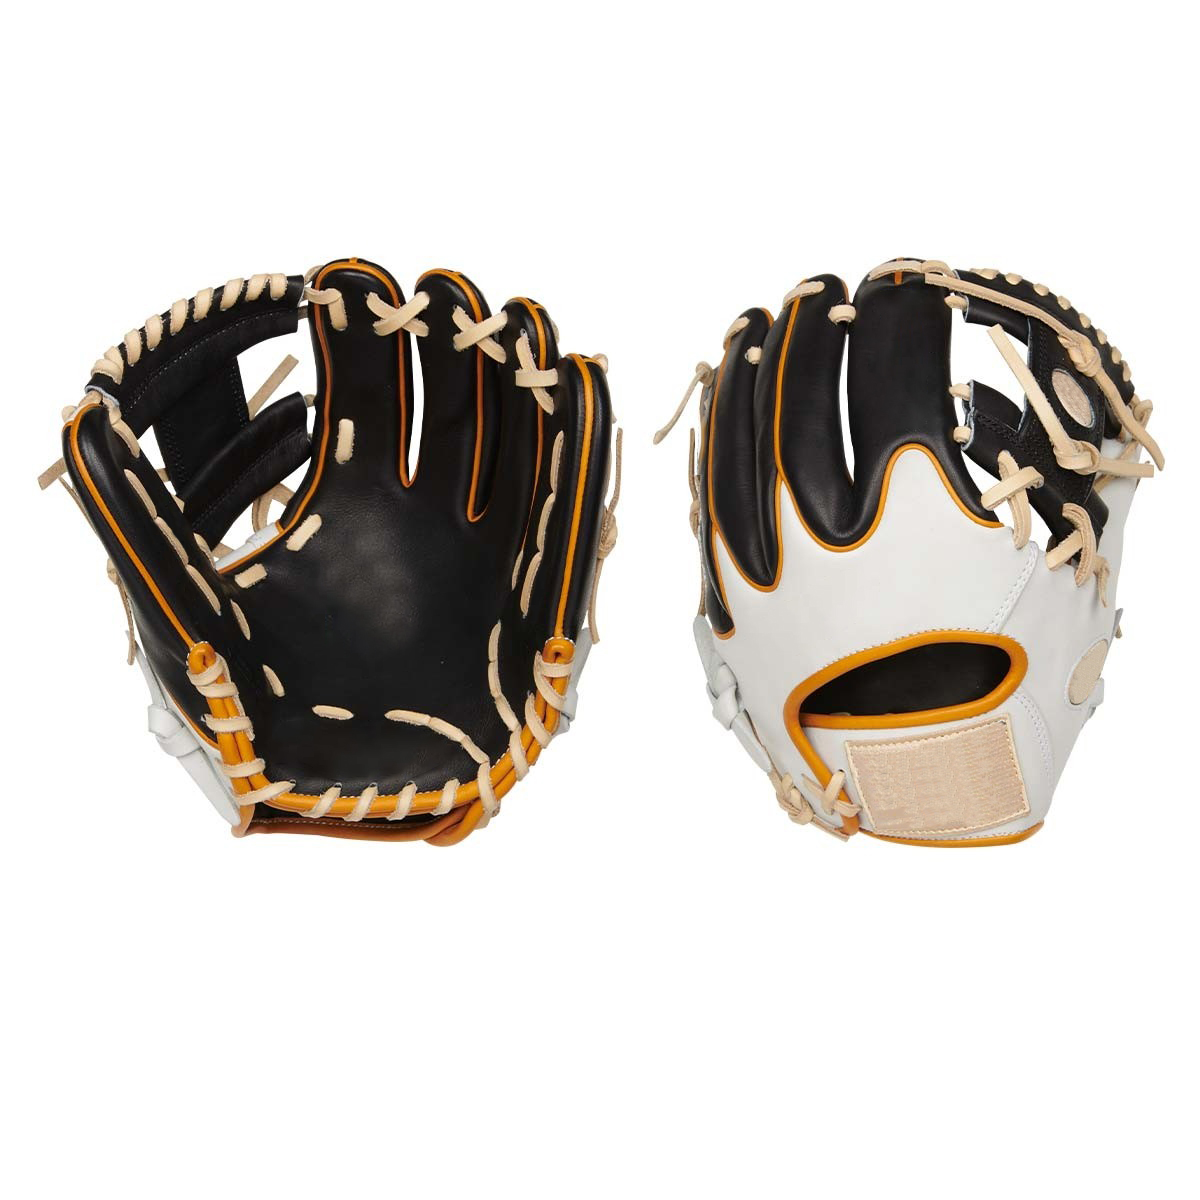 11.5" All leather hard-wearing youth Right hand throw baseball gloves